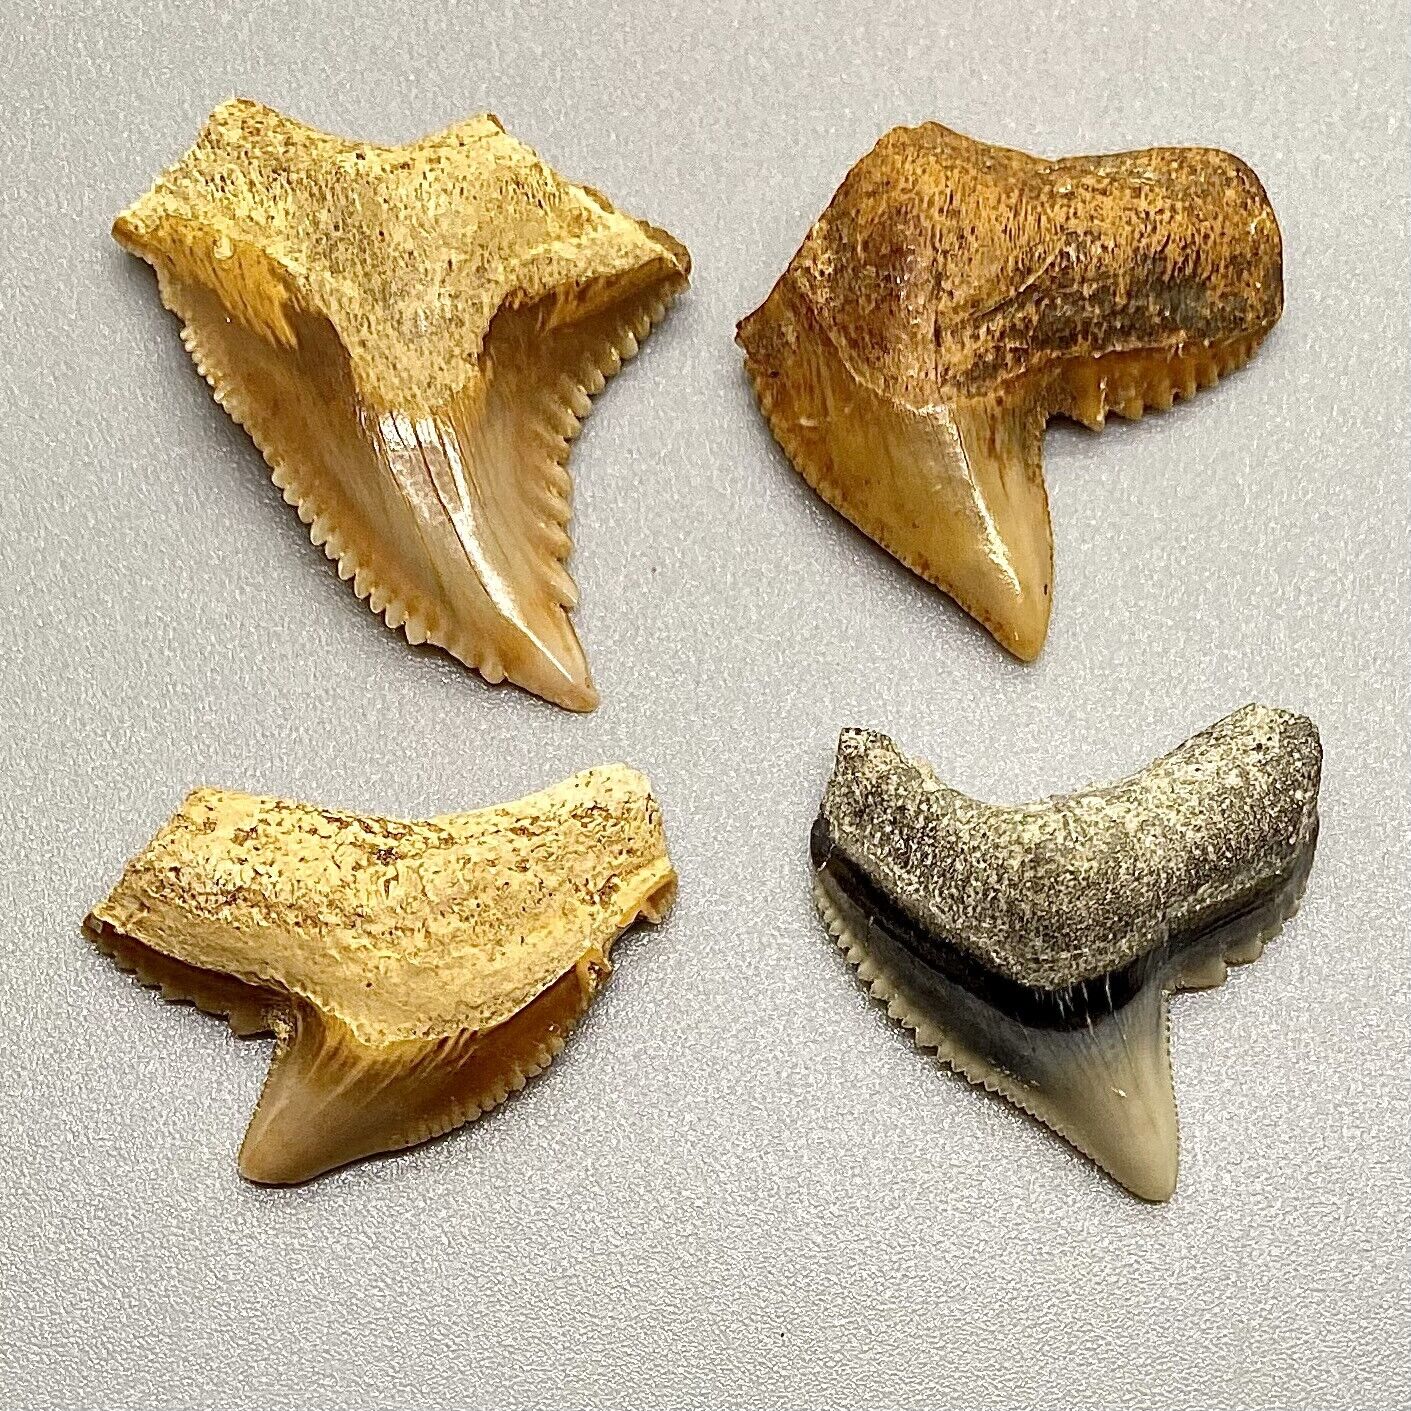 Group of colorful, sharply serrated miscellaneous Fossil Teeth - Indonesia